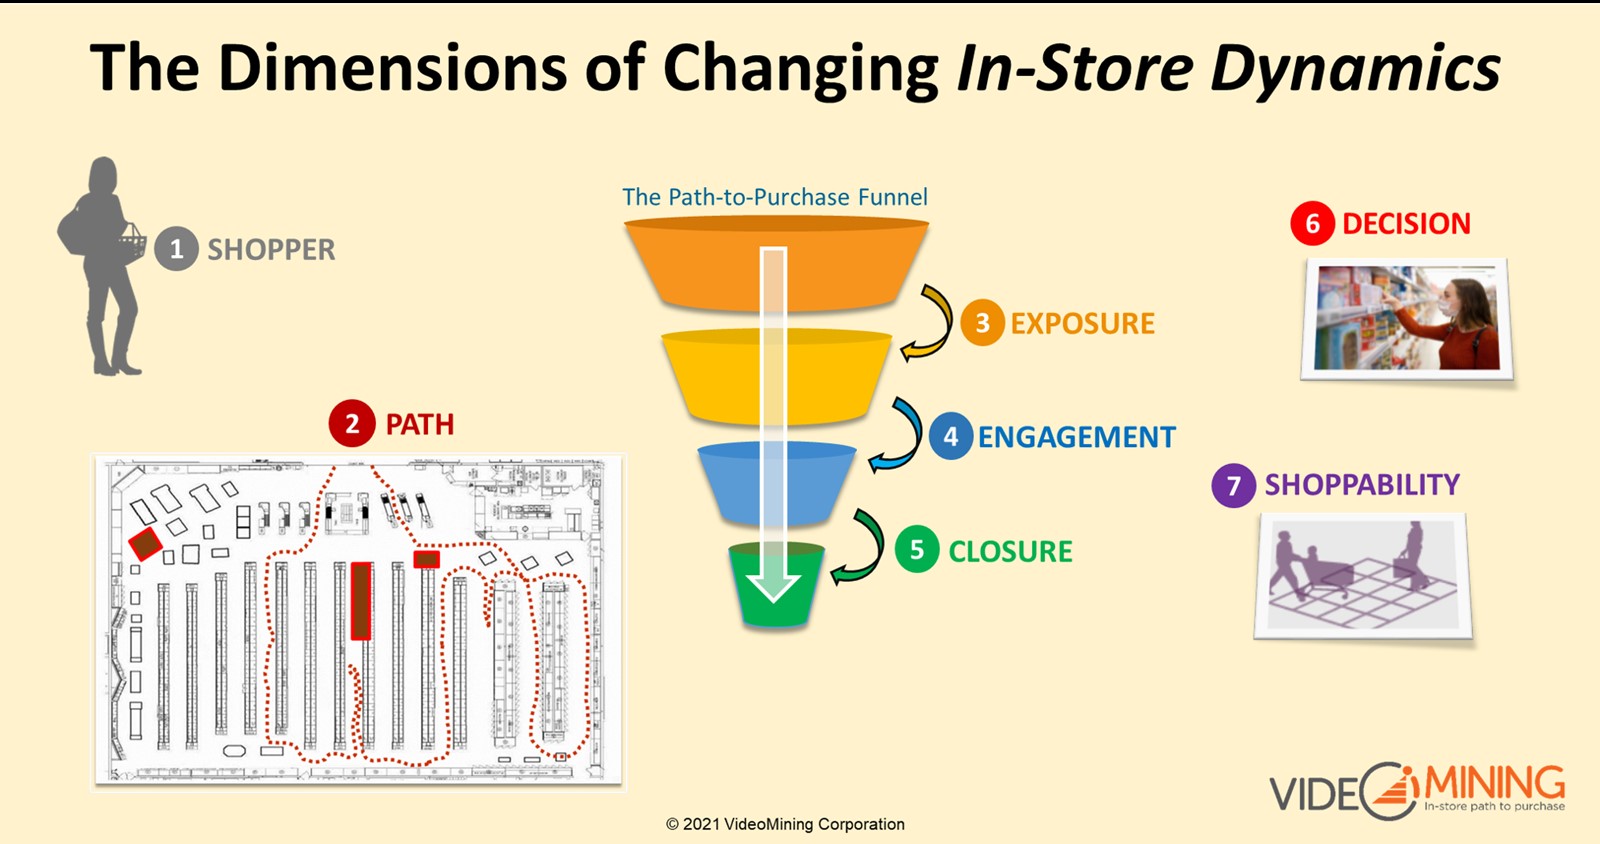 Seven dimensions of changing in-store dynamics